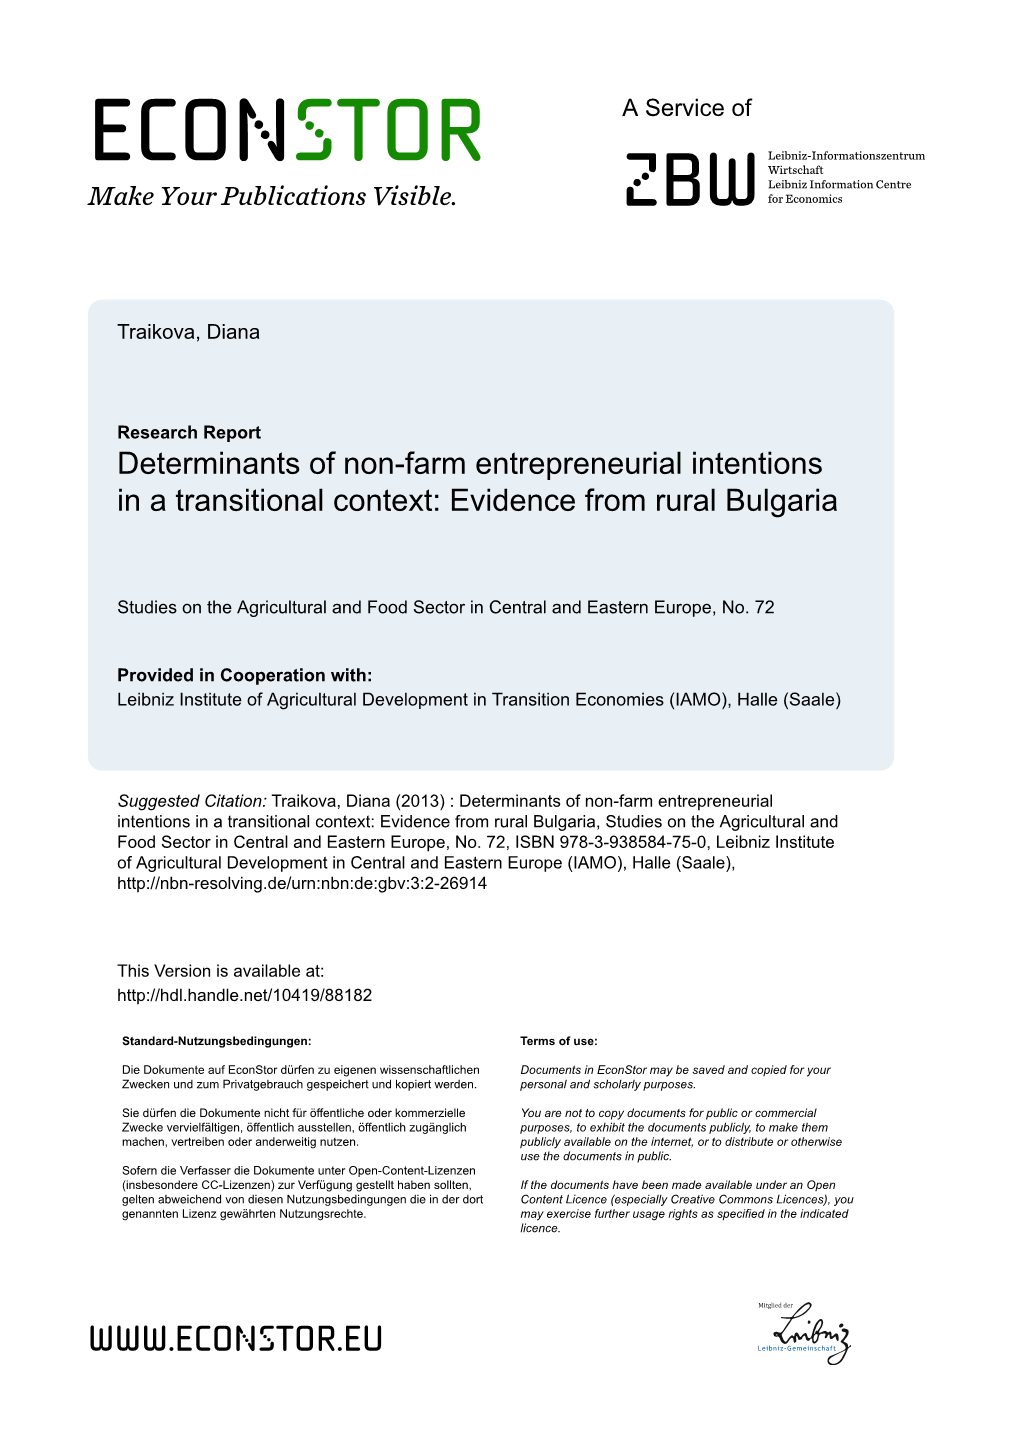 Determinants of Non-Farm Entrepreneurial Intentions in a Transitional Context: Evidence from Rural Bulgaria